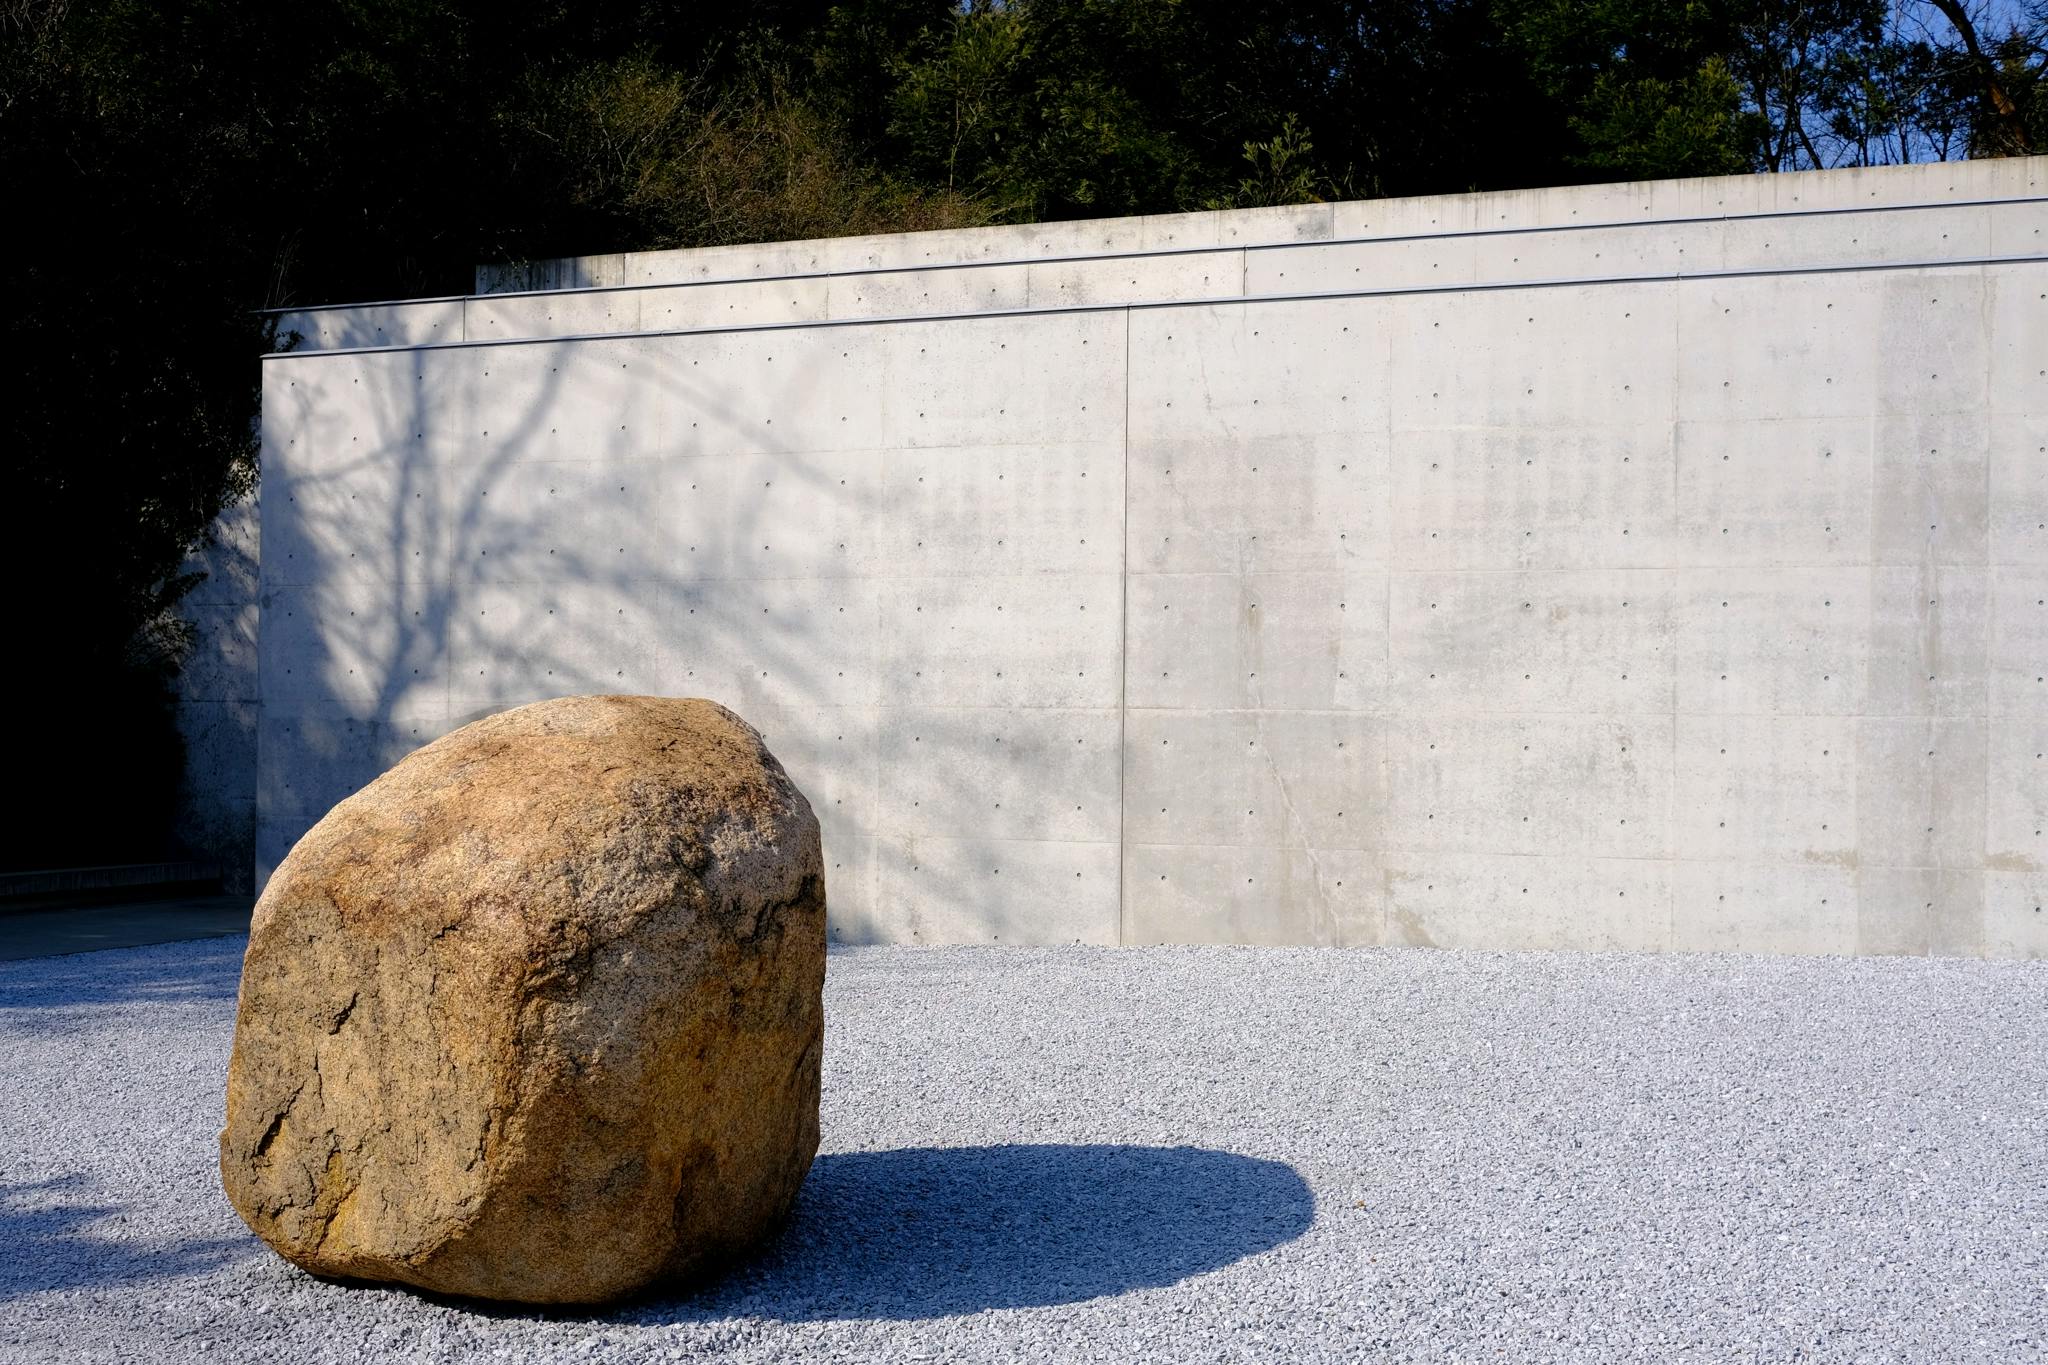 The front rock garden of the Lee Ufan Museum designed by Tadao Ando on Naoshima Island